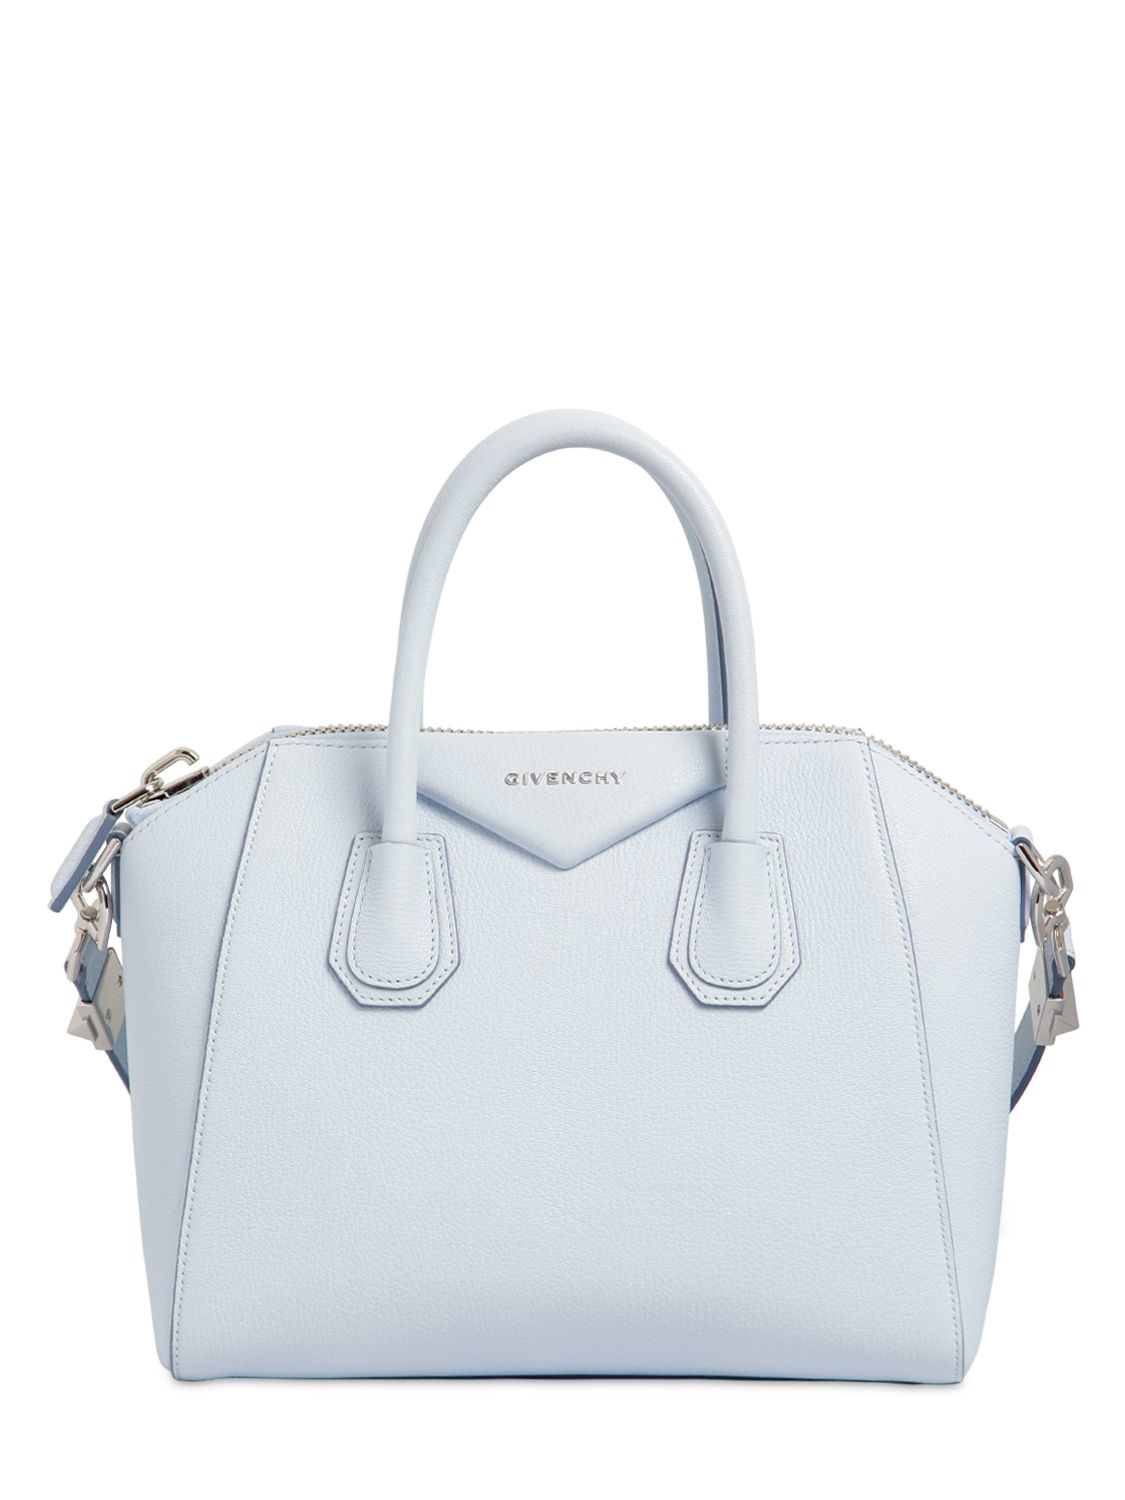 Givenchy Small Antigona Grained Leather Bag in Light Blue (Blue) - Lyst